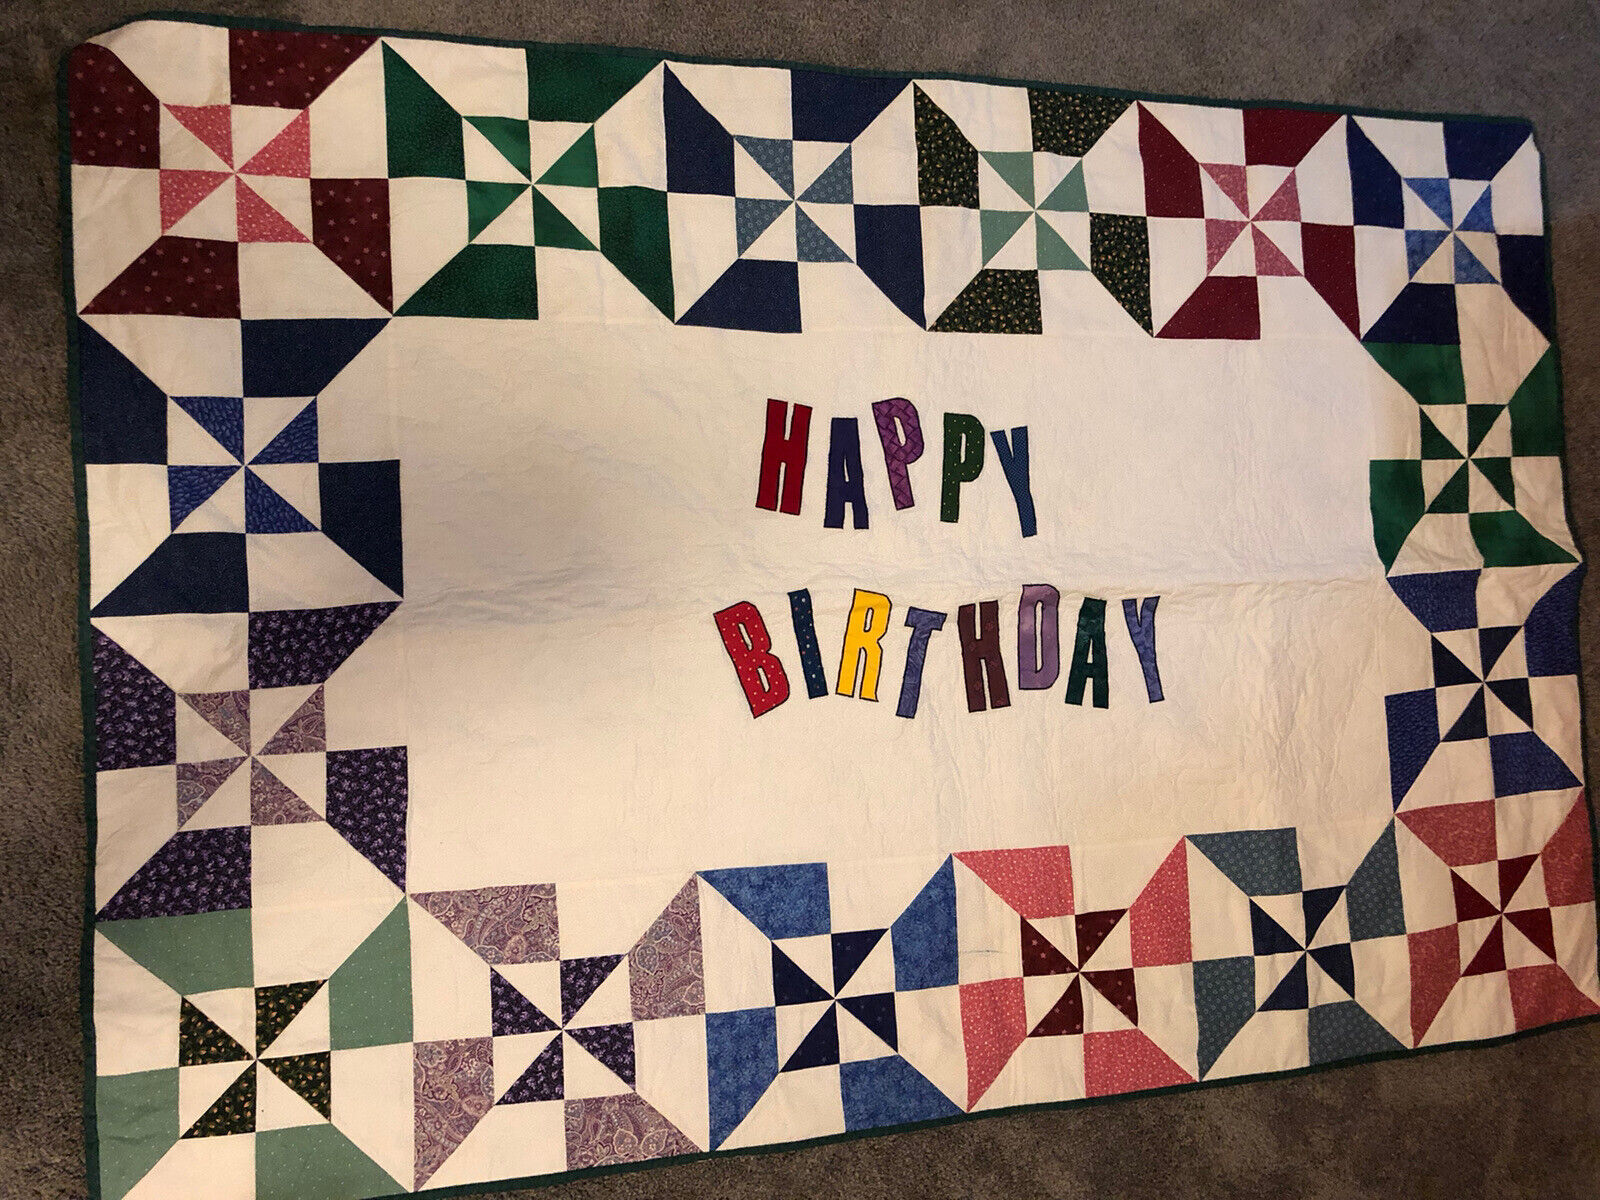 HAPPY BIRTHDAY quilt 66” X 45” Pinwheel Quilted